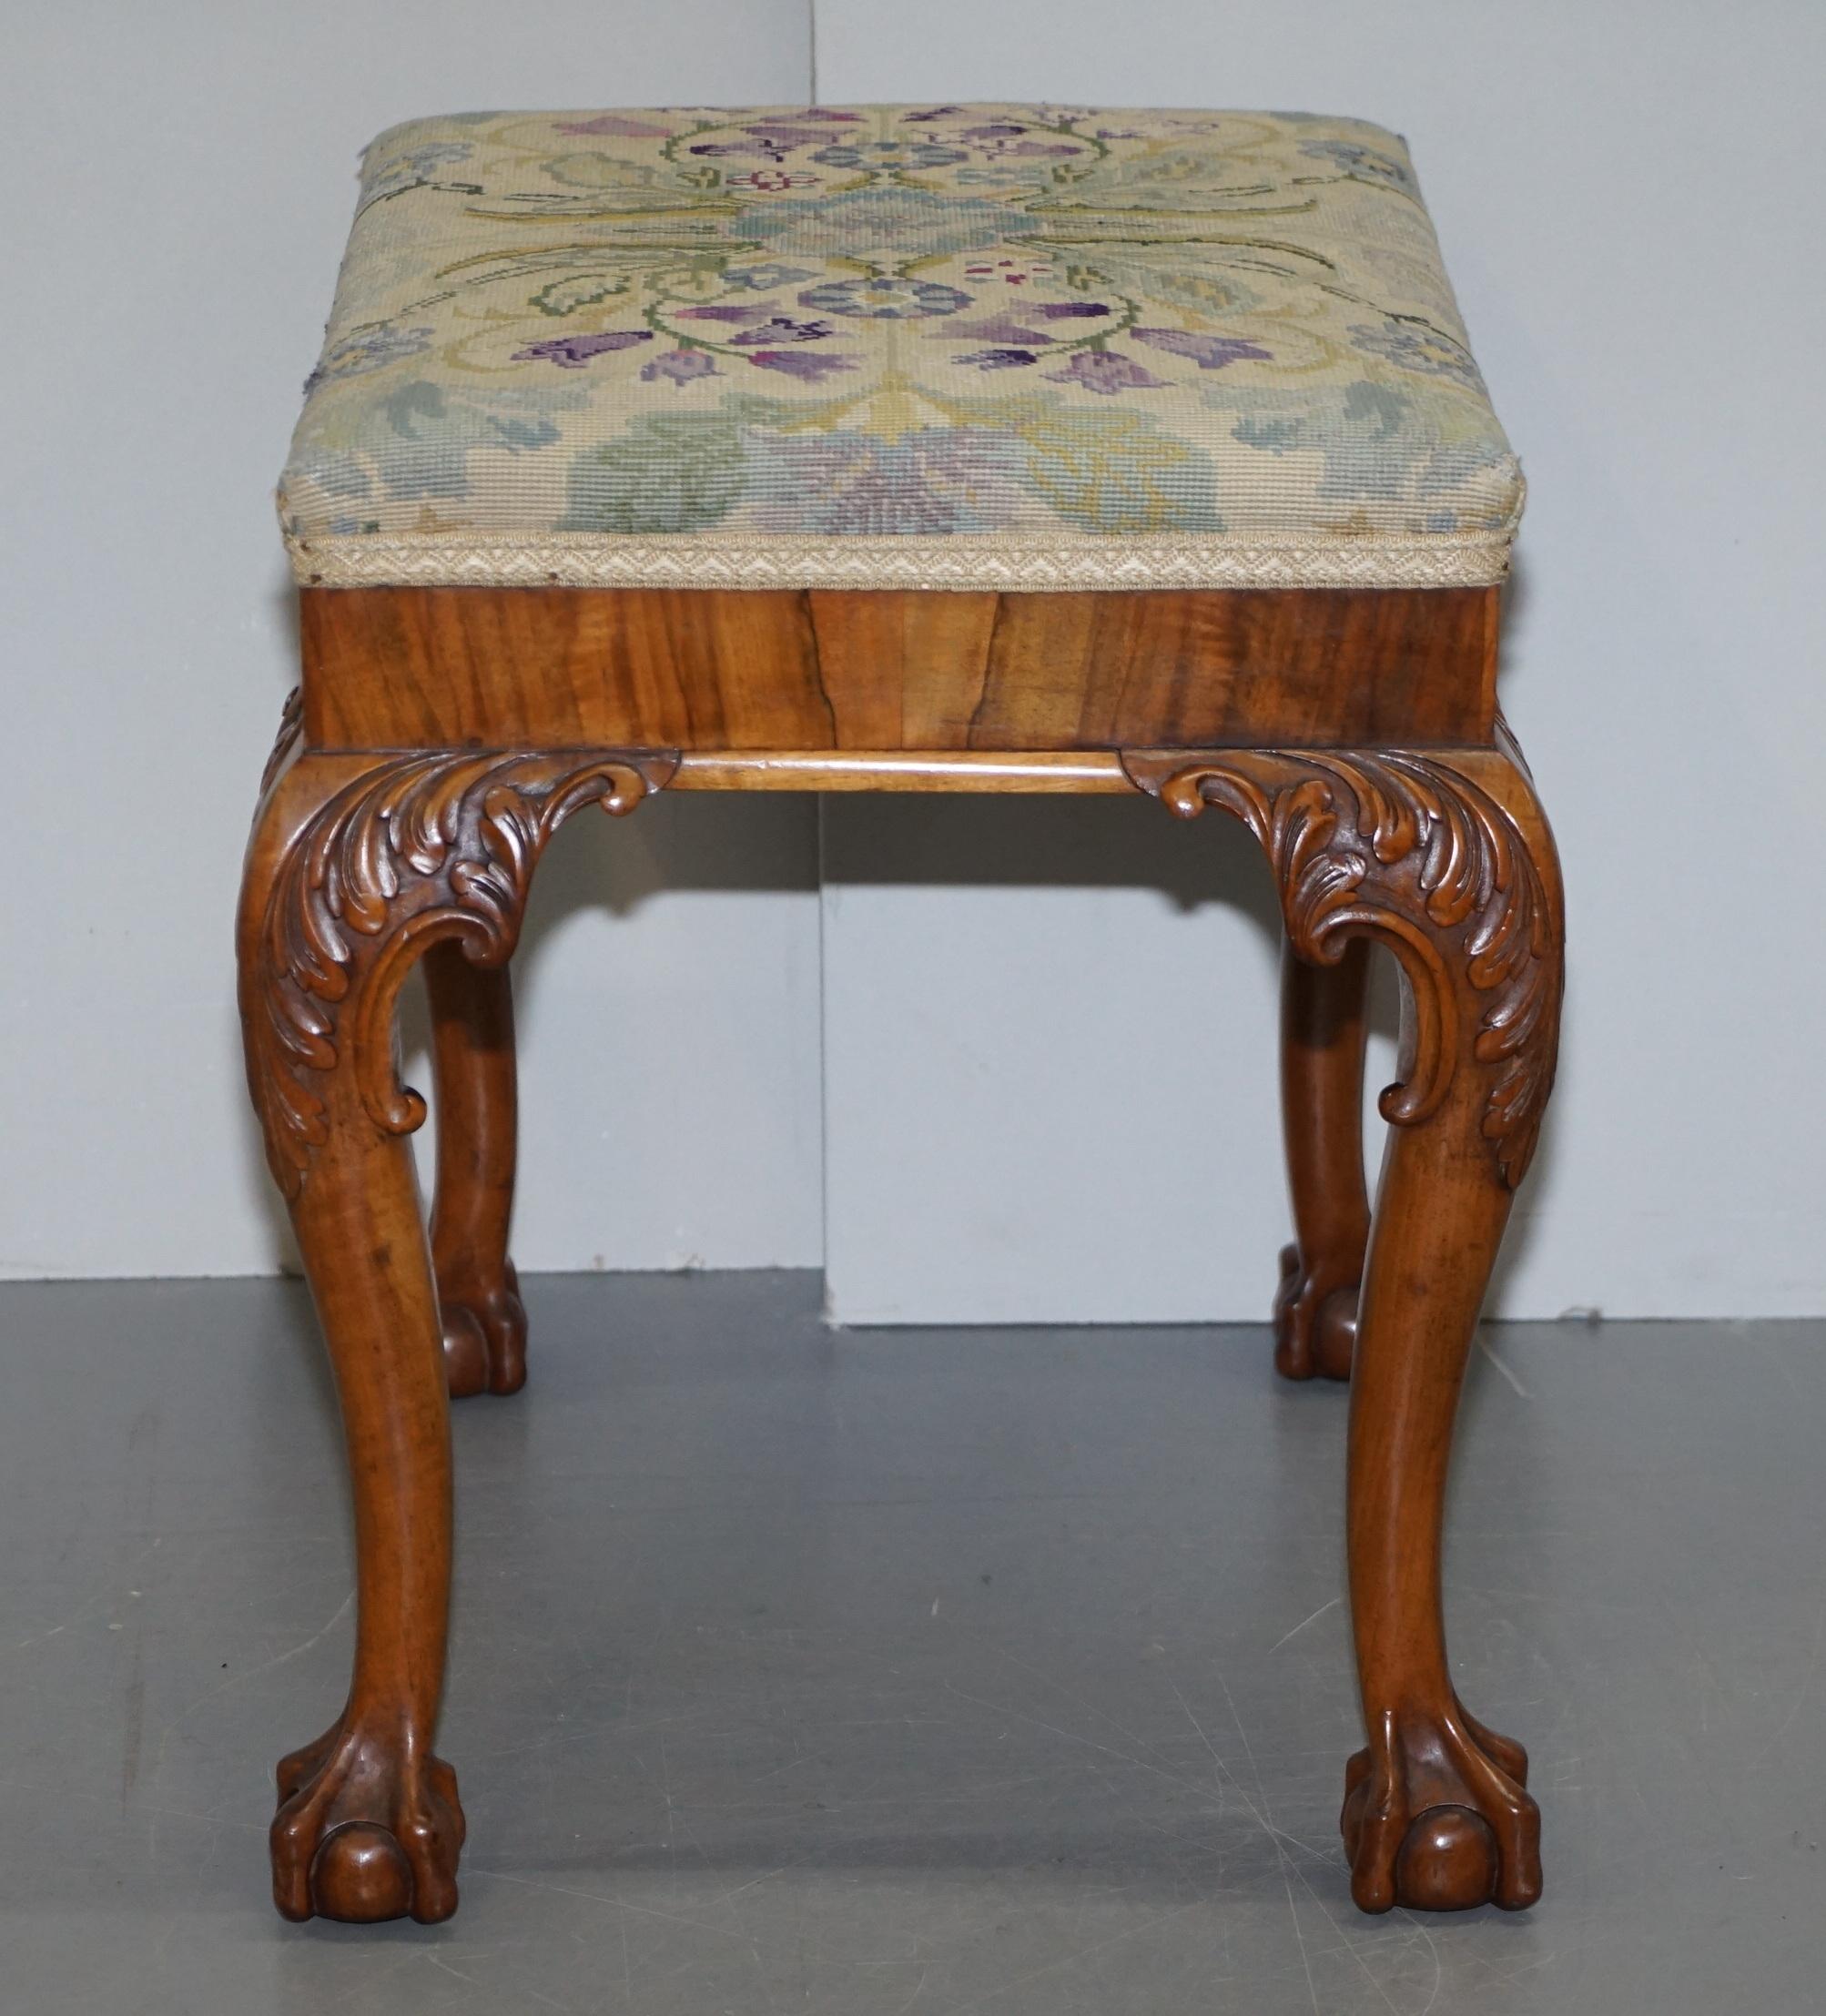 Upholstery Original George III 1760 Hand Carved Claw & Ball Feet Piano Stool or Bench Seat